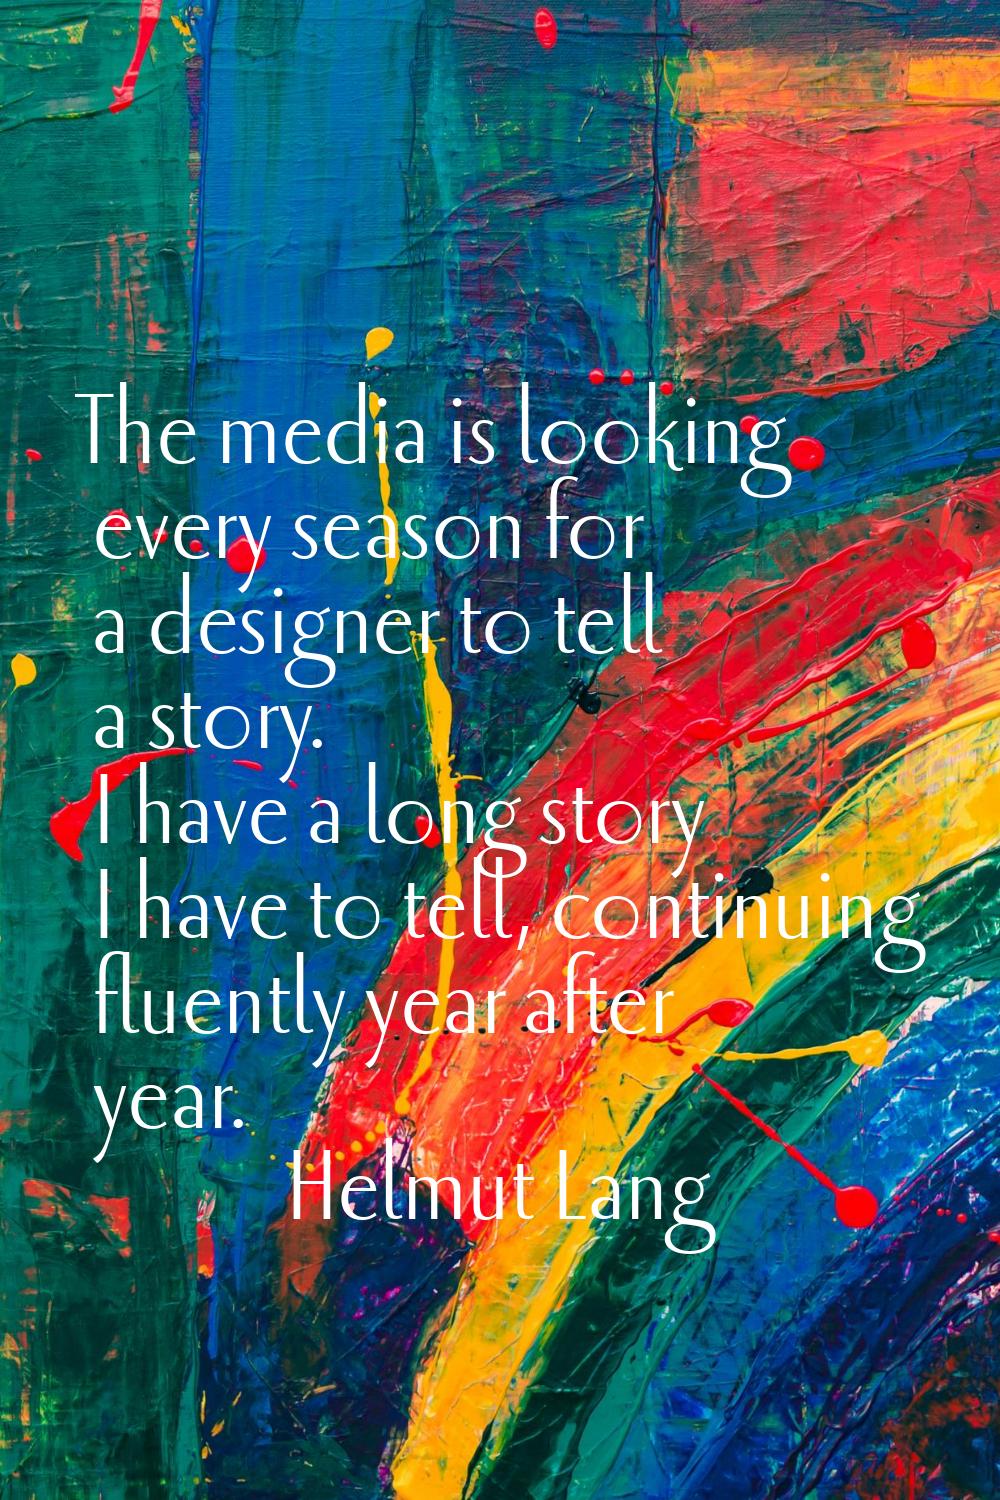 The media is looking every season for a designer to tell a story. I have a long story I have to tel